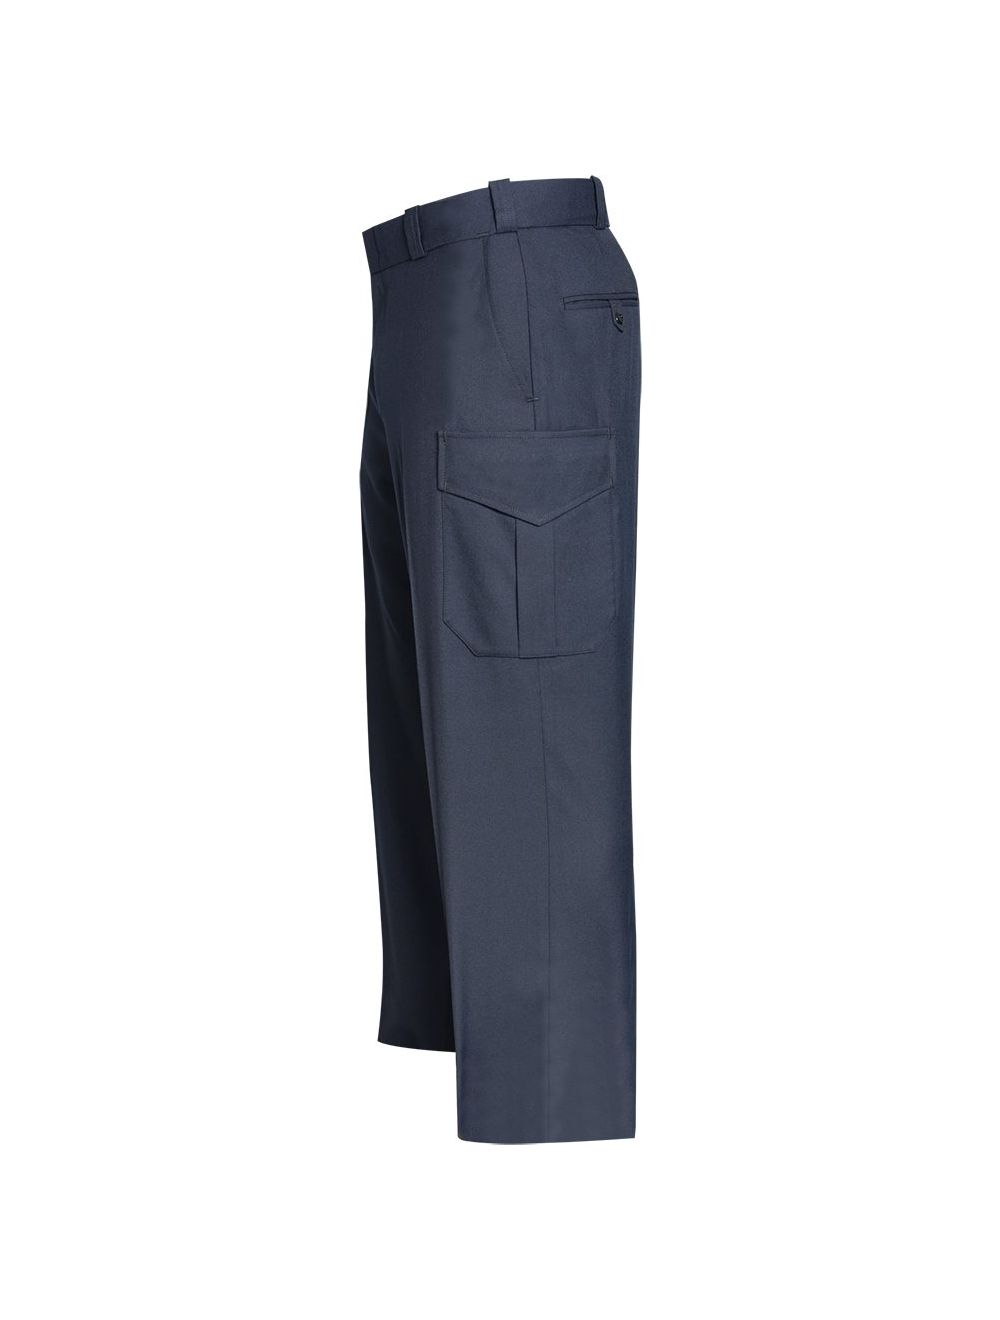 Command Pants w/ Cargo Pockets - LAPD Navy